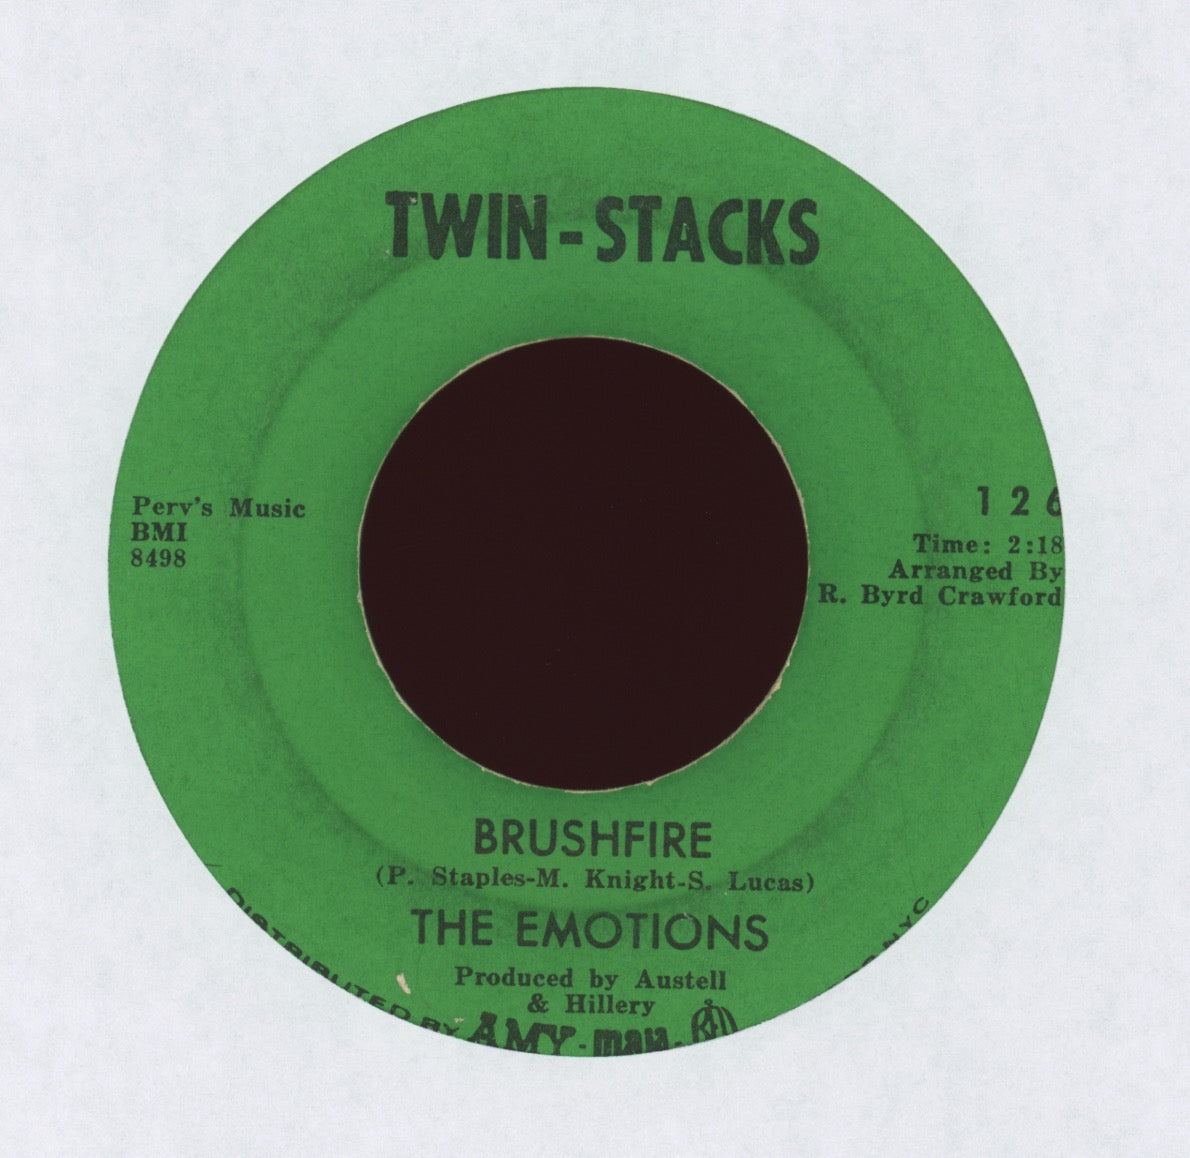 The Emotions - Brushfire on Twin Stacks